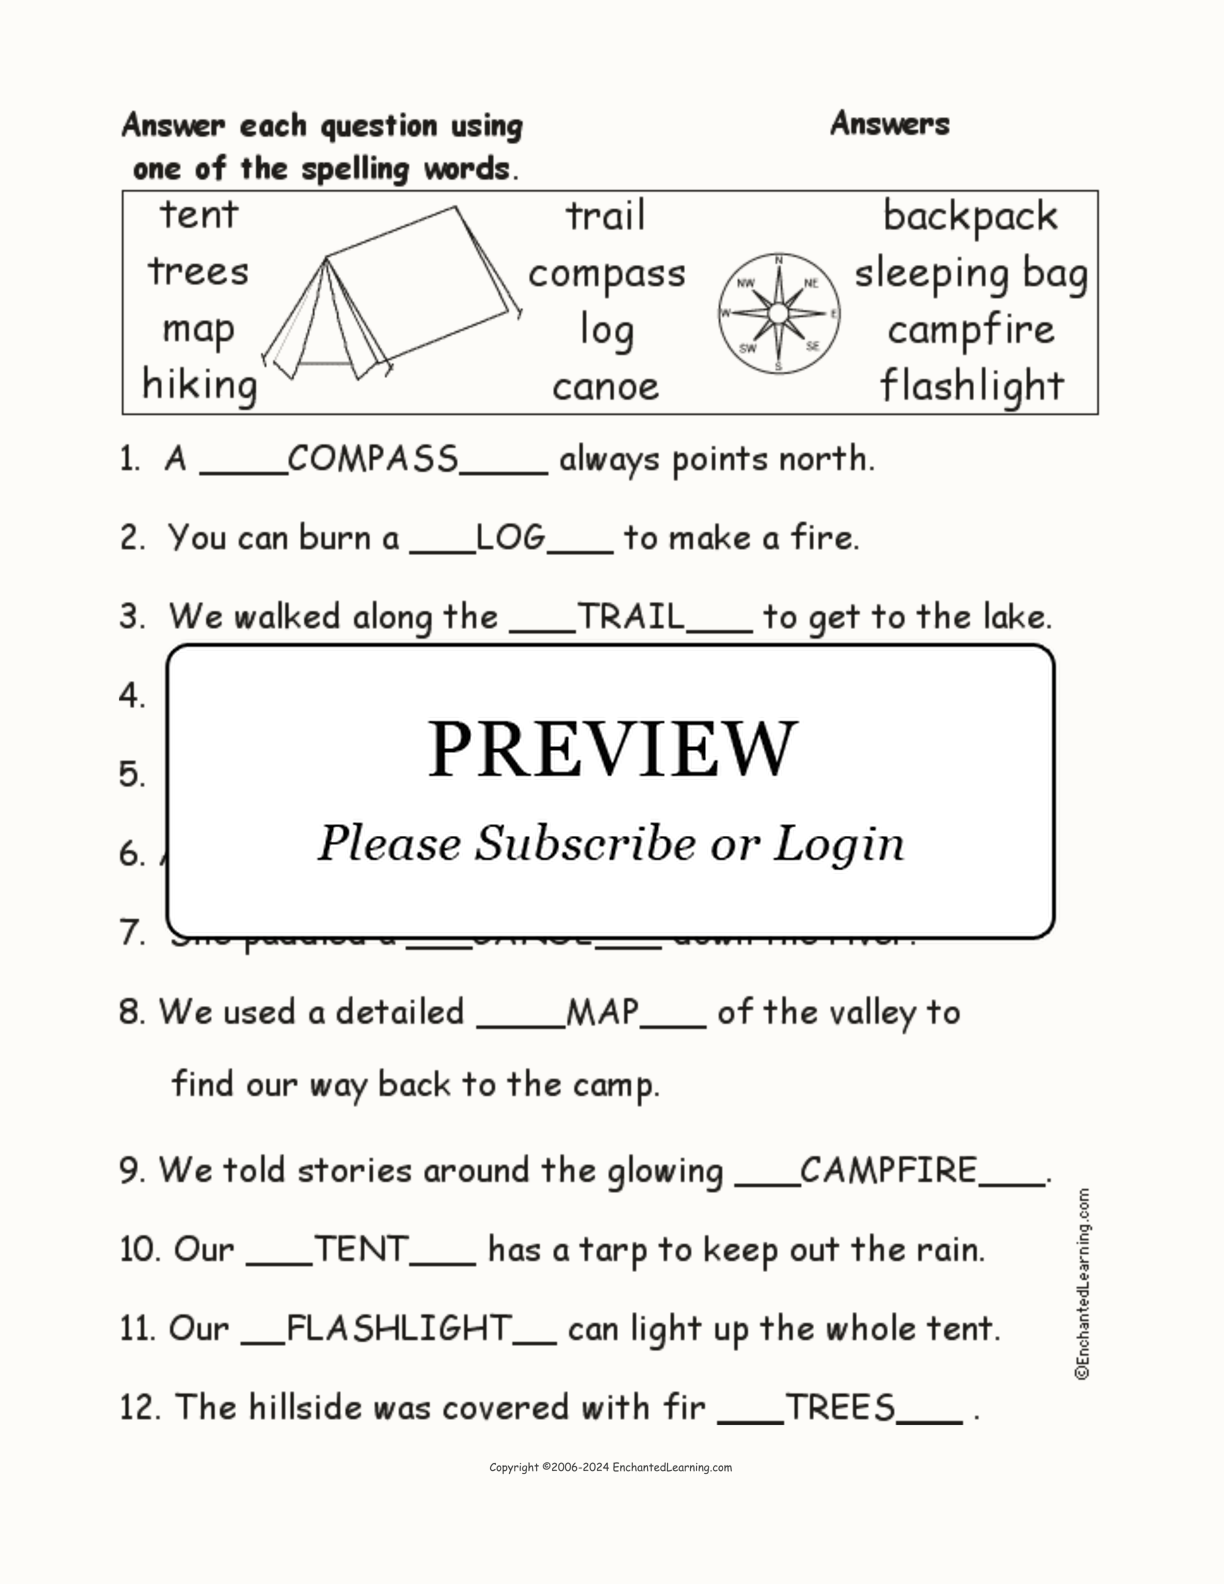 Camping Spelling Word Questions interactive worksheet page 2